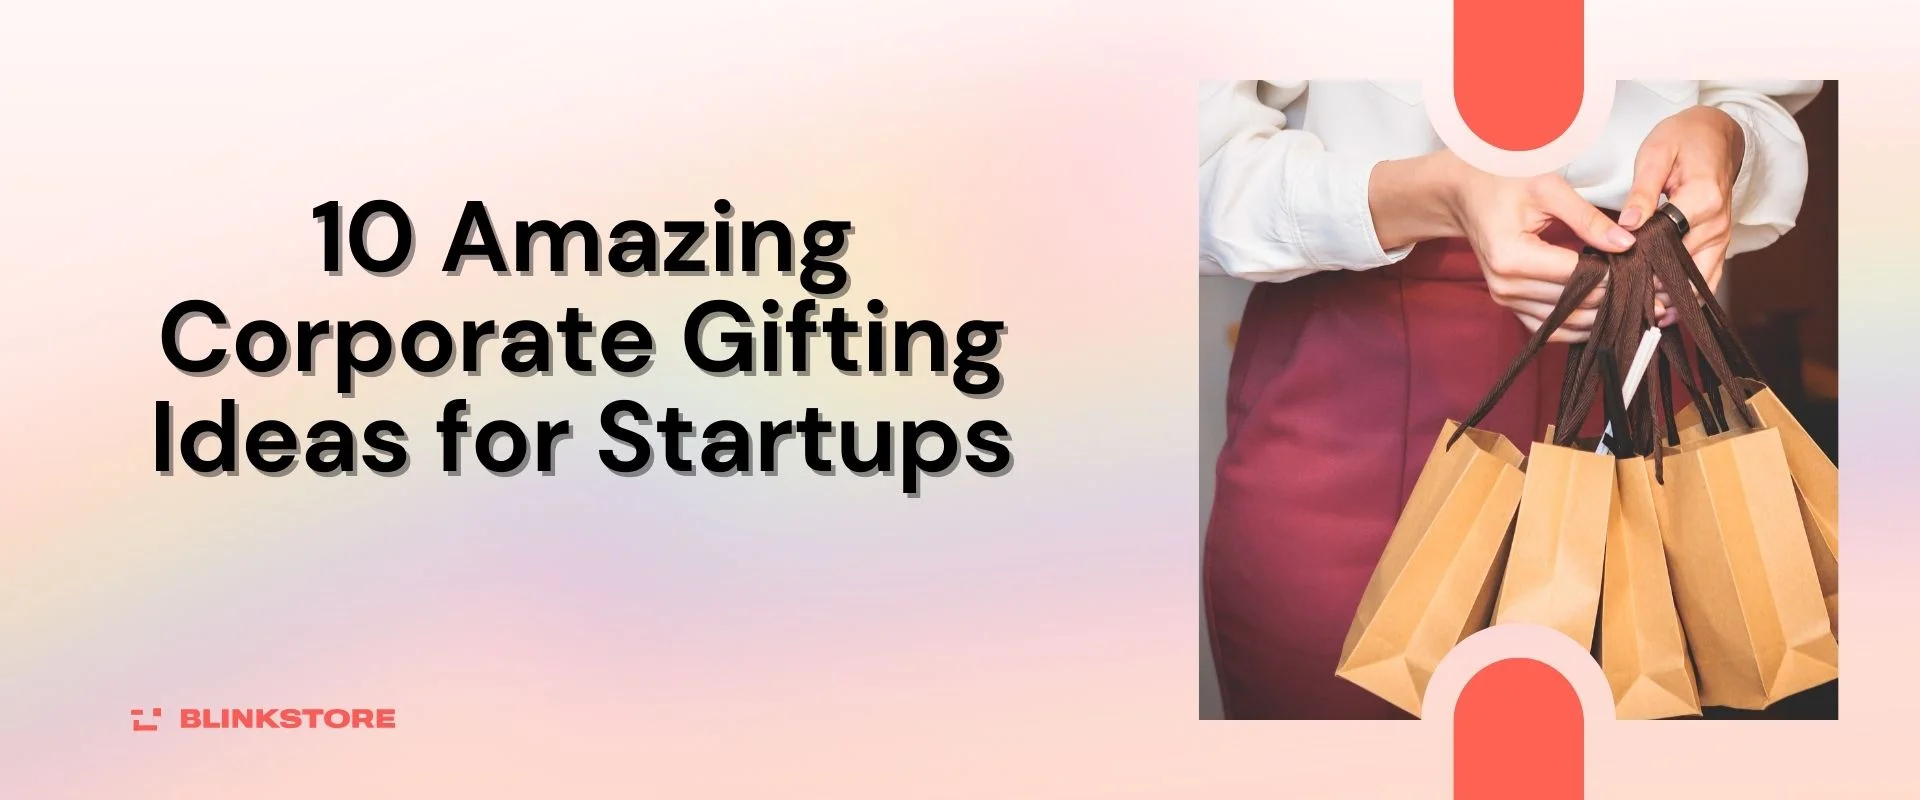 Corporate Gifting Ideas for Startups